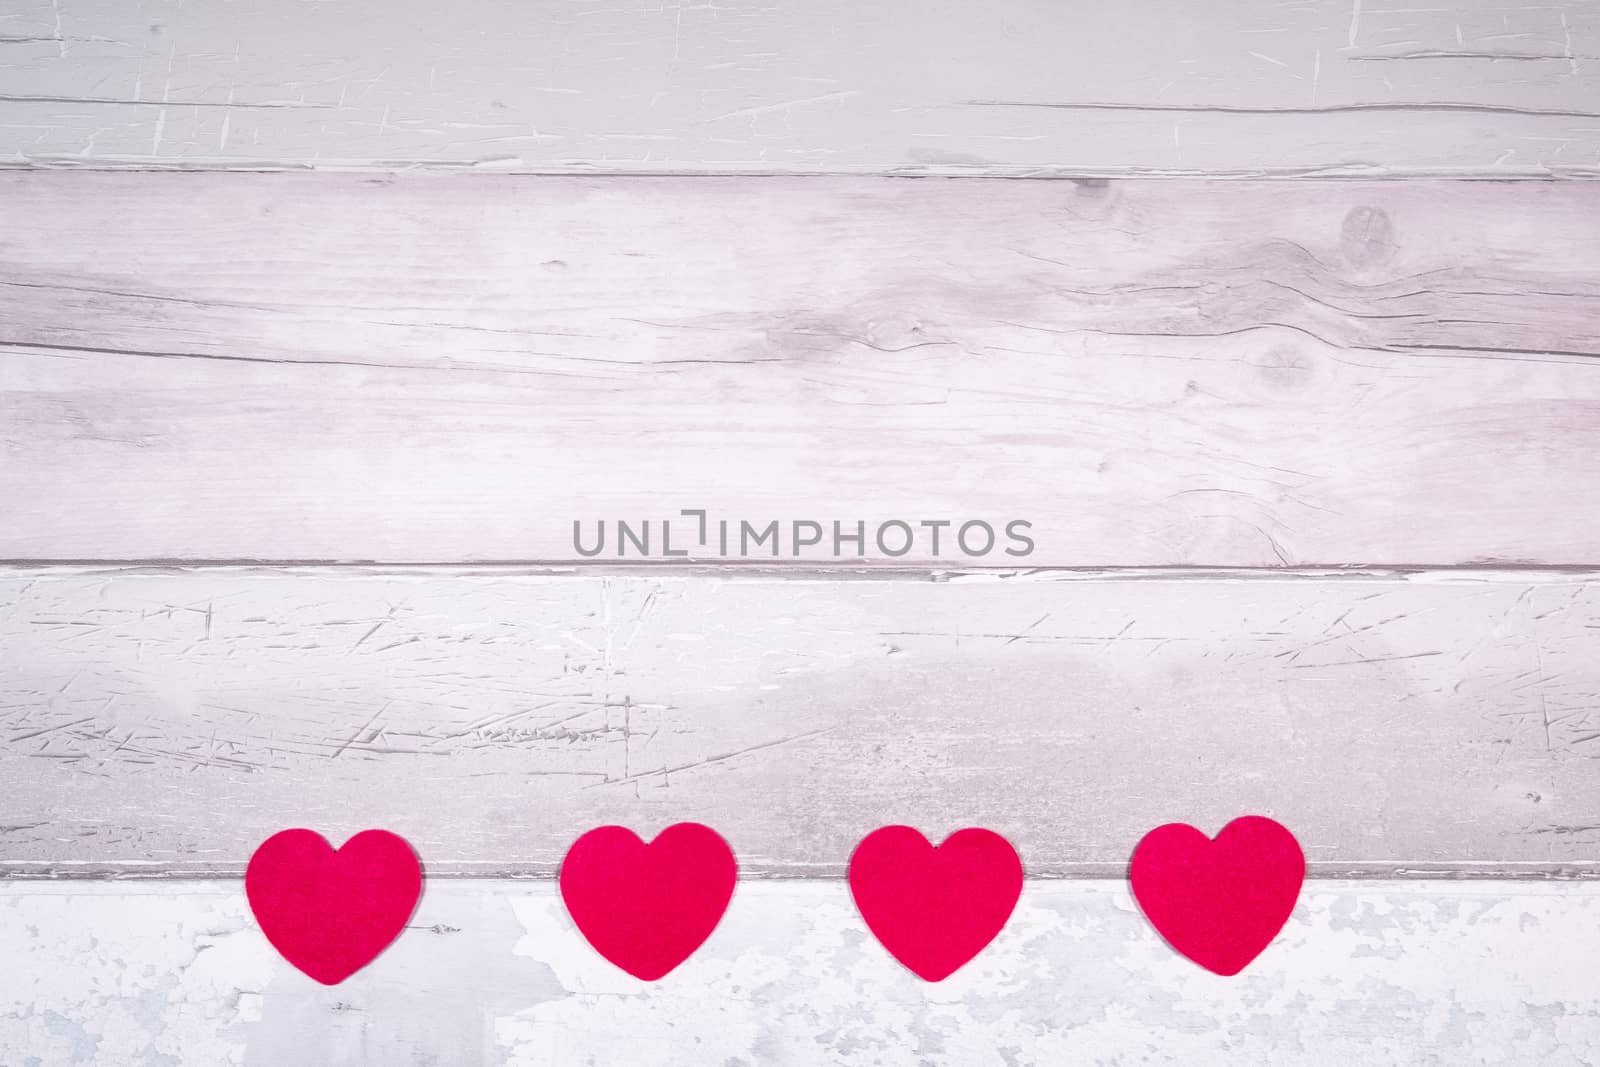 Red felt hearts on a background of old wooden planks resembling an old parquet floor. Concept of valentines day and love in general.